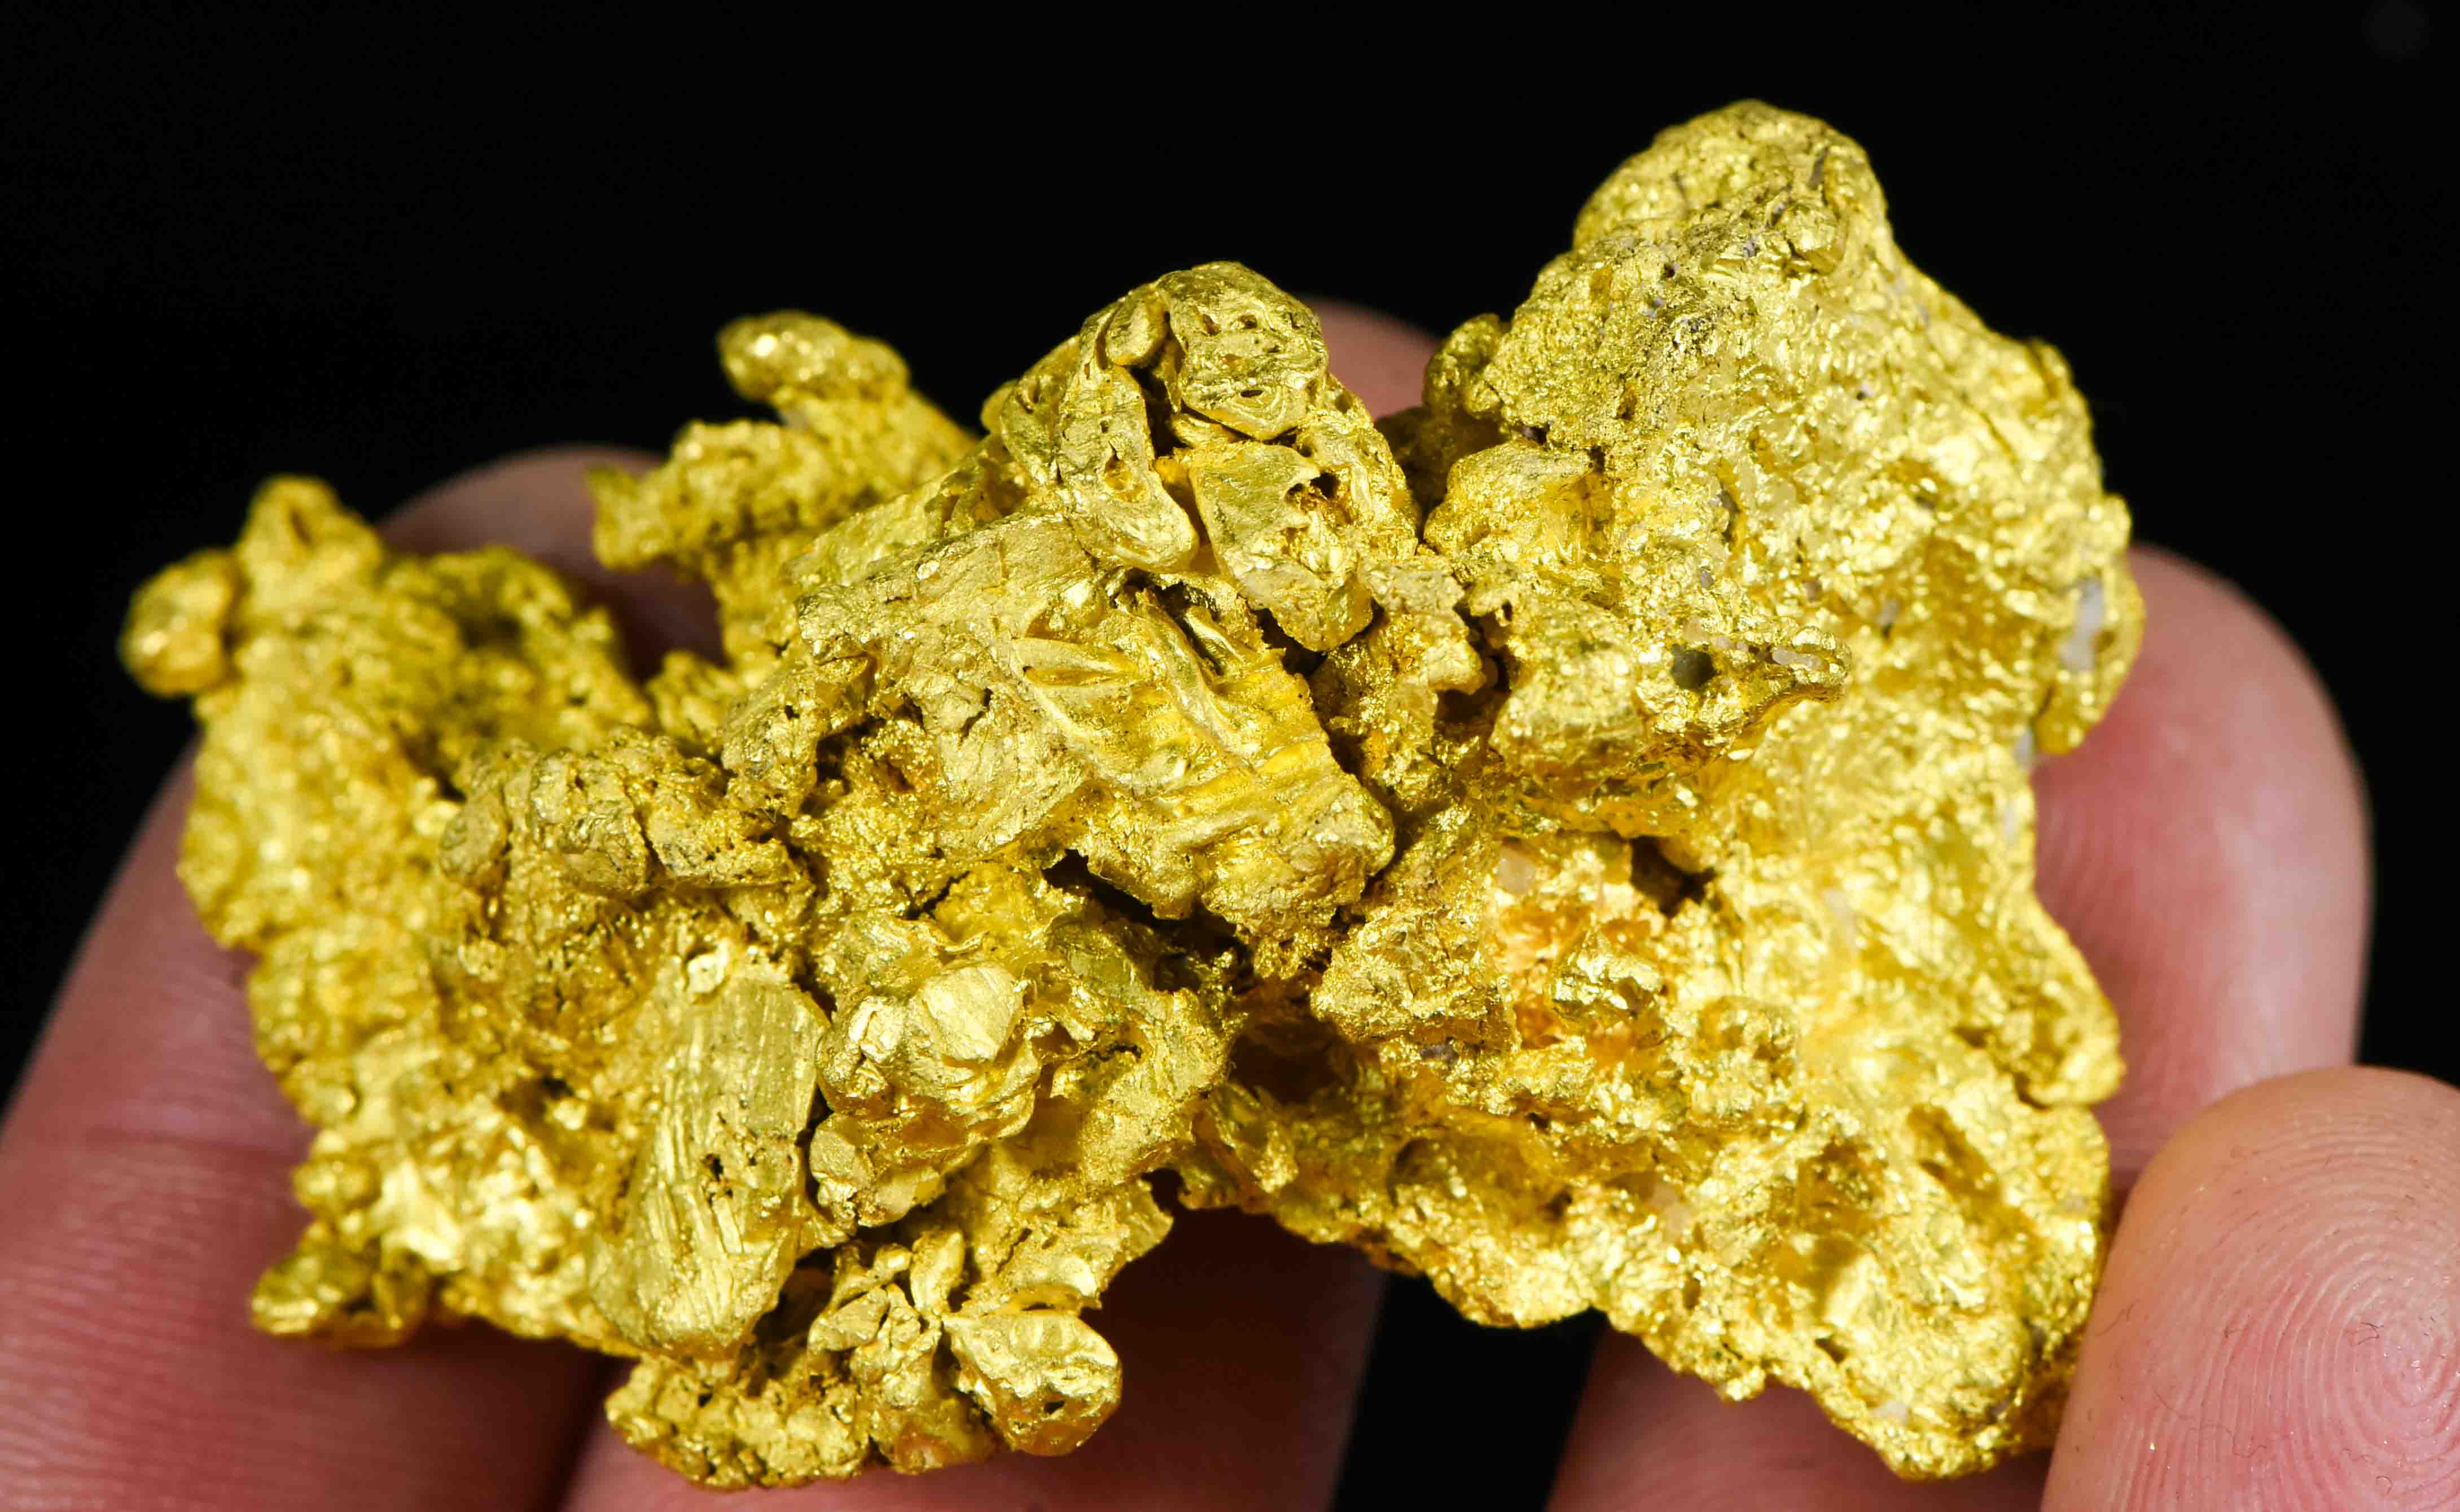 Large Natural Gold Nugget Australian 134.55 Grams 4.33 Troy Ounces Very Rare